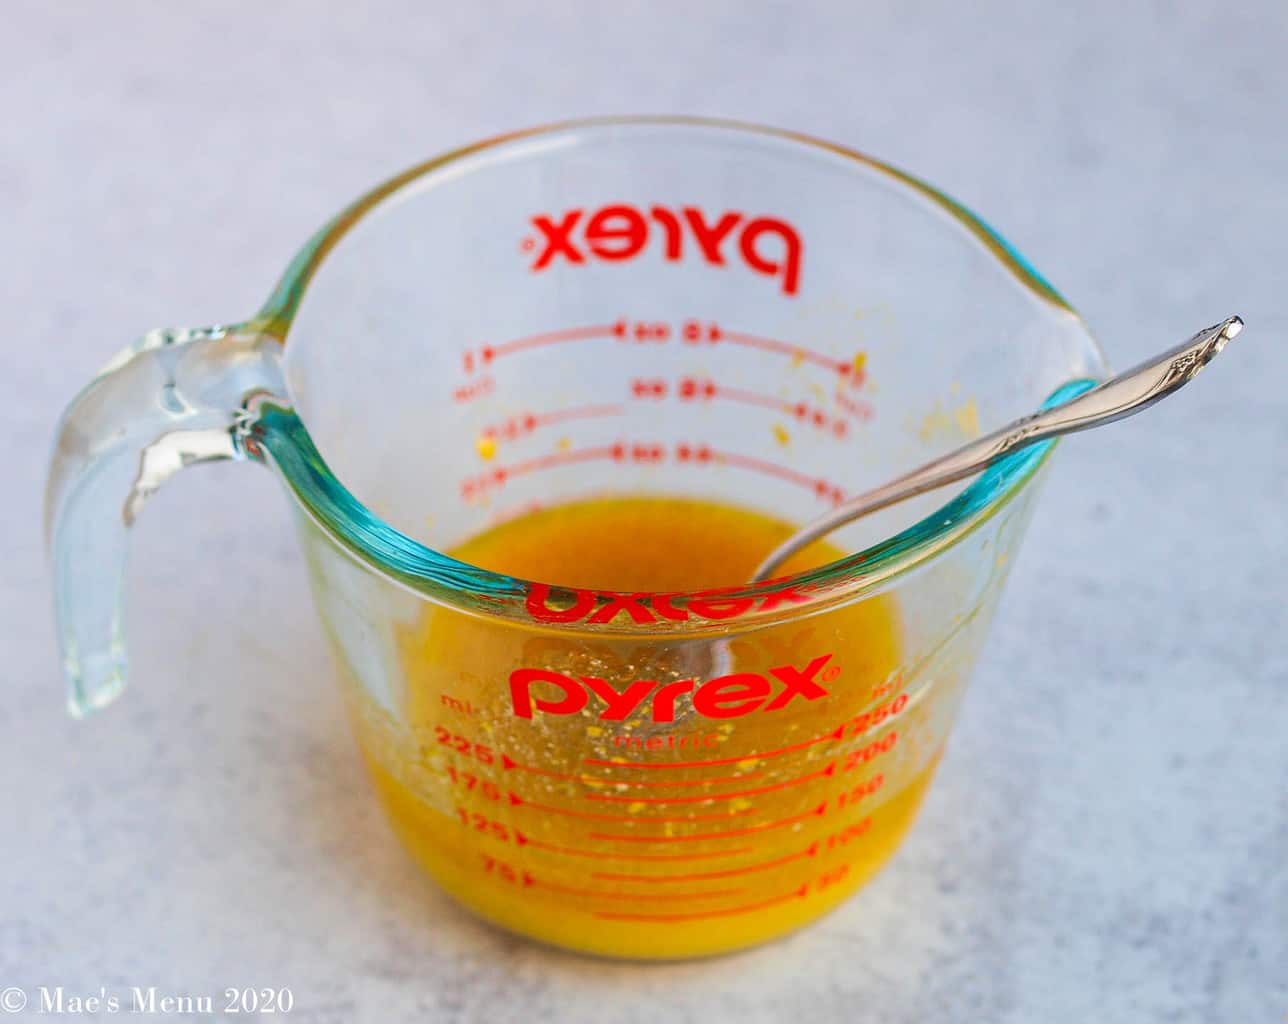 Whisking up the vinaigrette in a glass measuring cup